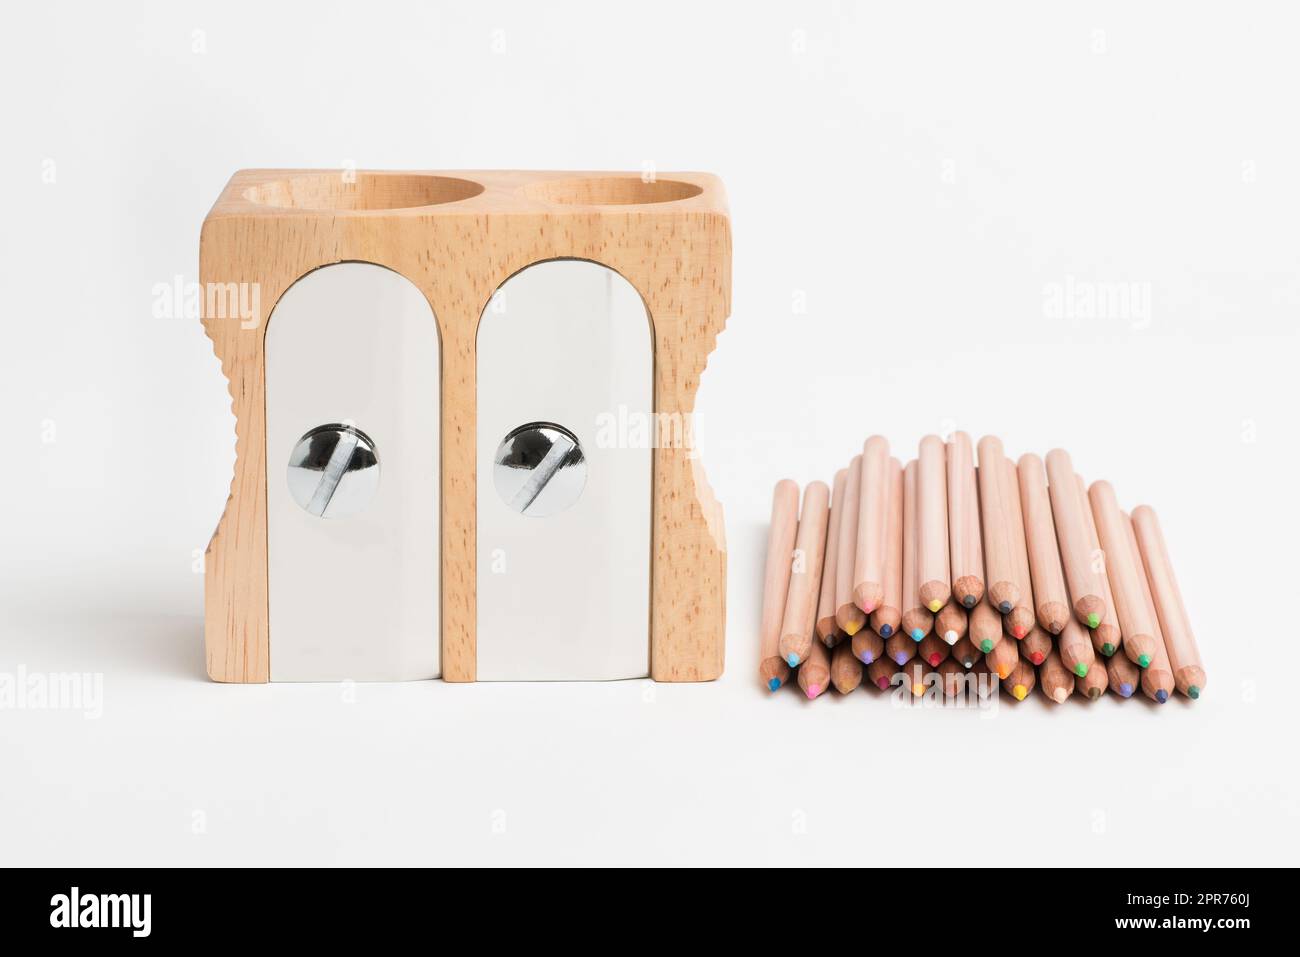 Keep it sharp, make your mark. Studio shot of a wooden sharpener and pencils. Stock Photo